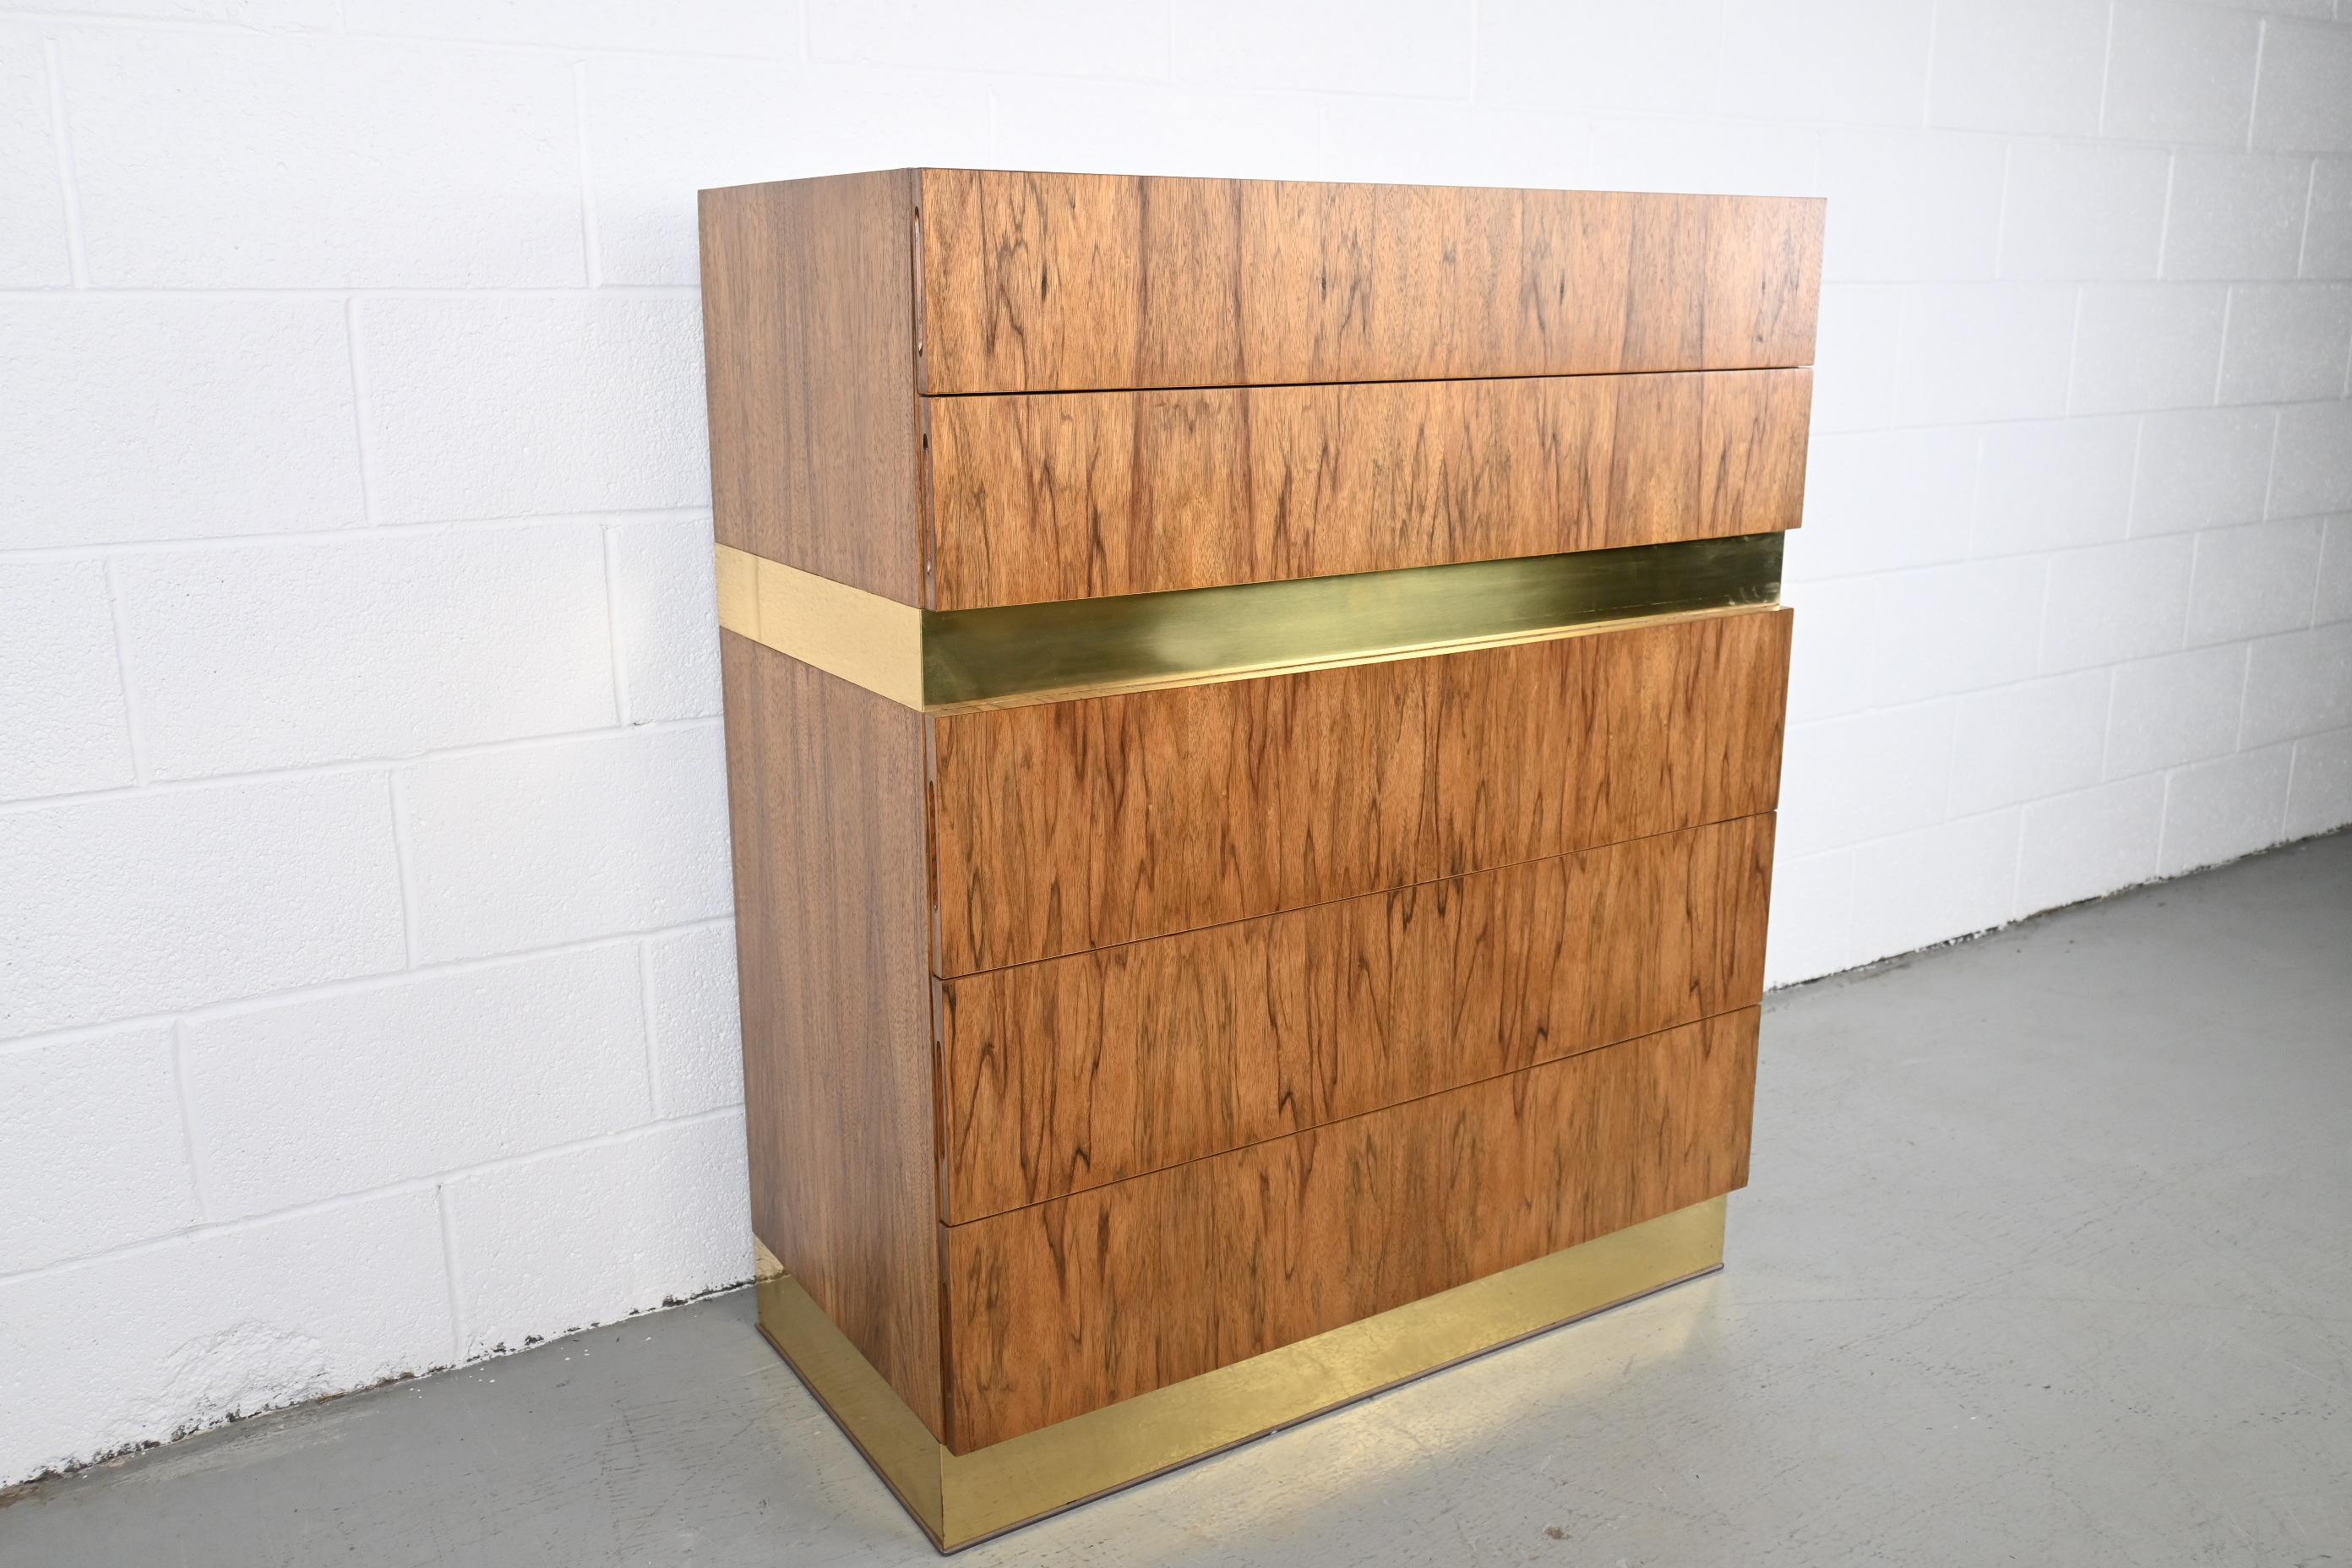 Milo Baughman for Thayer Coggin rosewood and brass five drawer highboy

Thayer Coggin, USA 1970s

Measures: 36 Wide x 18 Deep x 43.25 High

Mid-Century Modern rosewood five drawer highboy dresser with brass accents.

Professionally